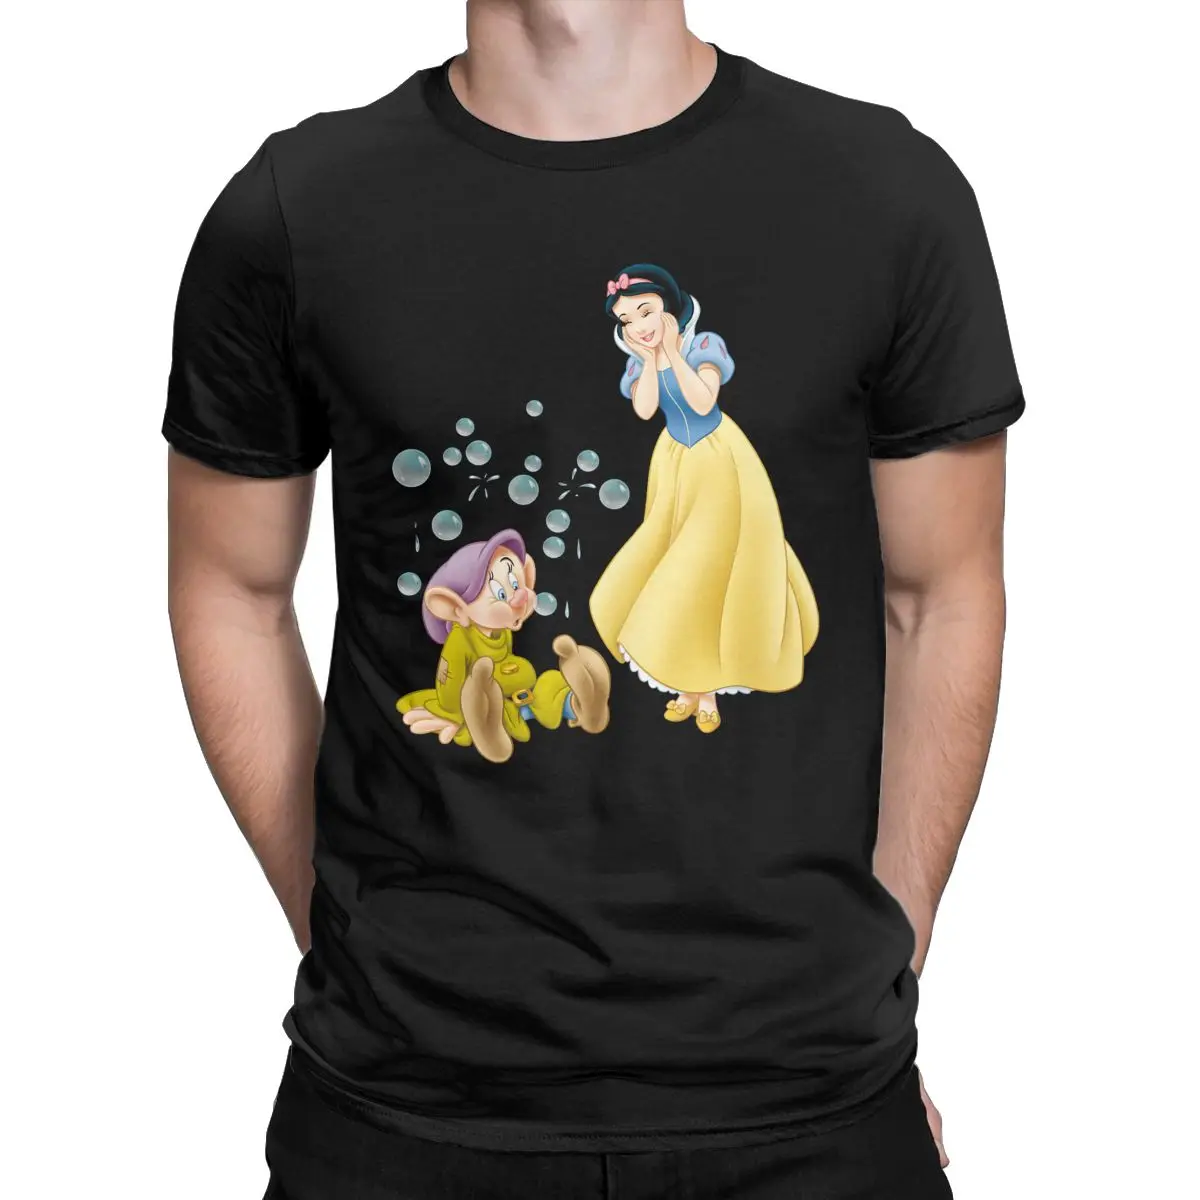 Snow White And Dopey Bubbles T-Shirts Men Disney Humorous Cotton Tee Shirt Round Collar Short Sleeve T Shirt Gift Idea Clothes